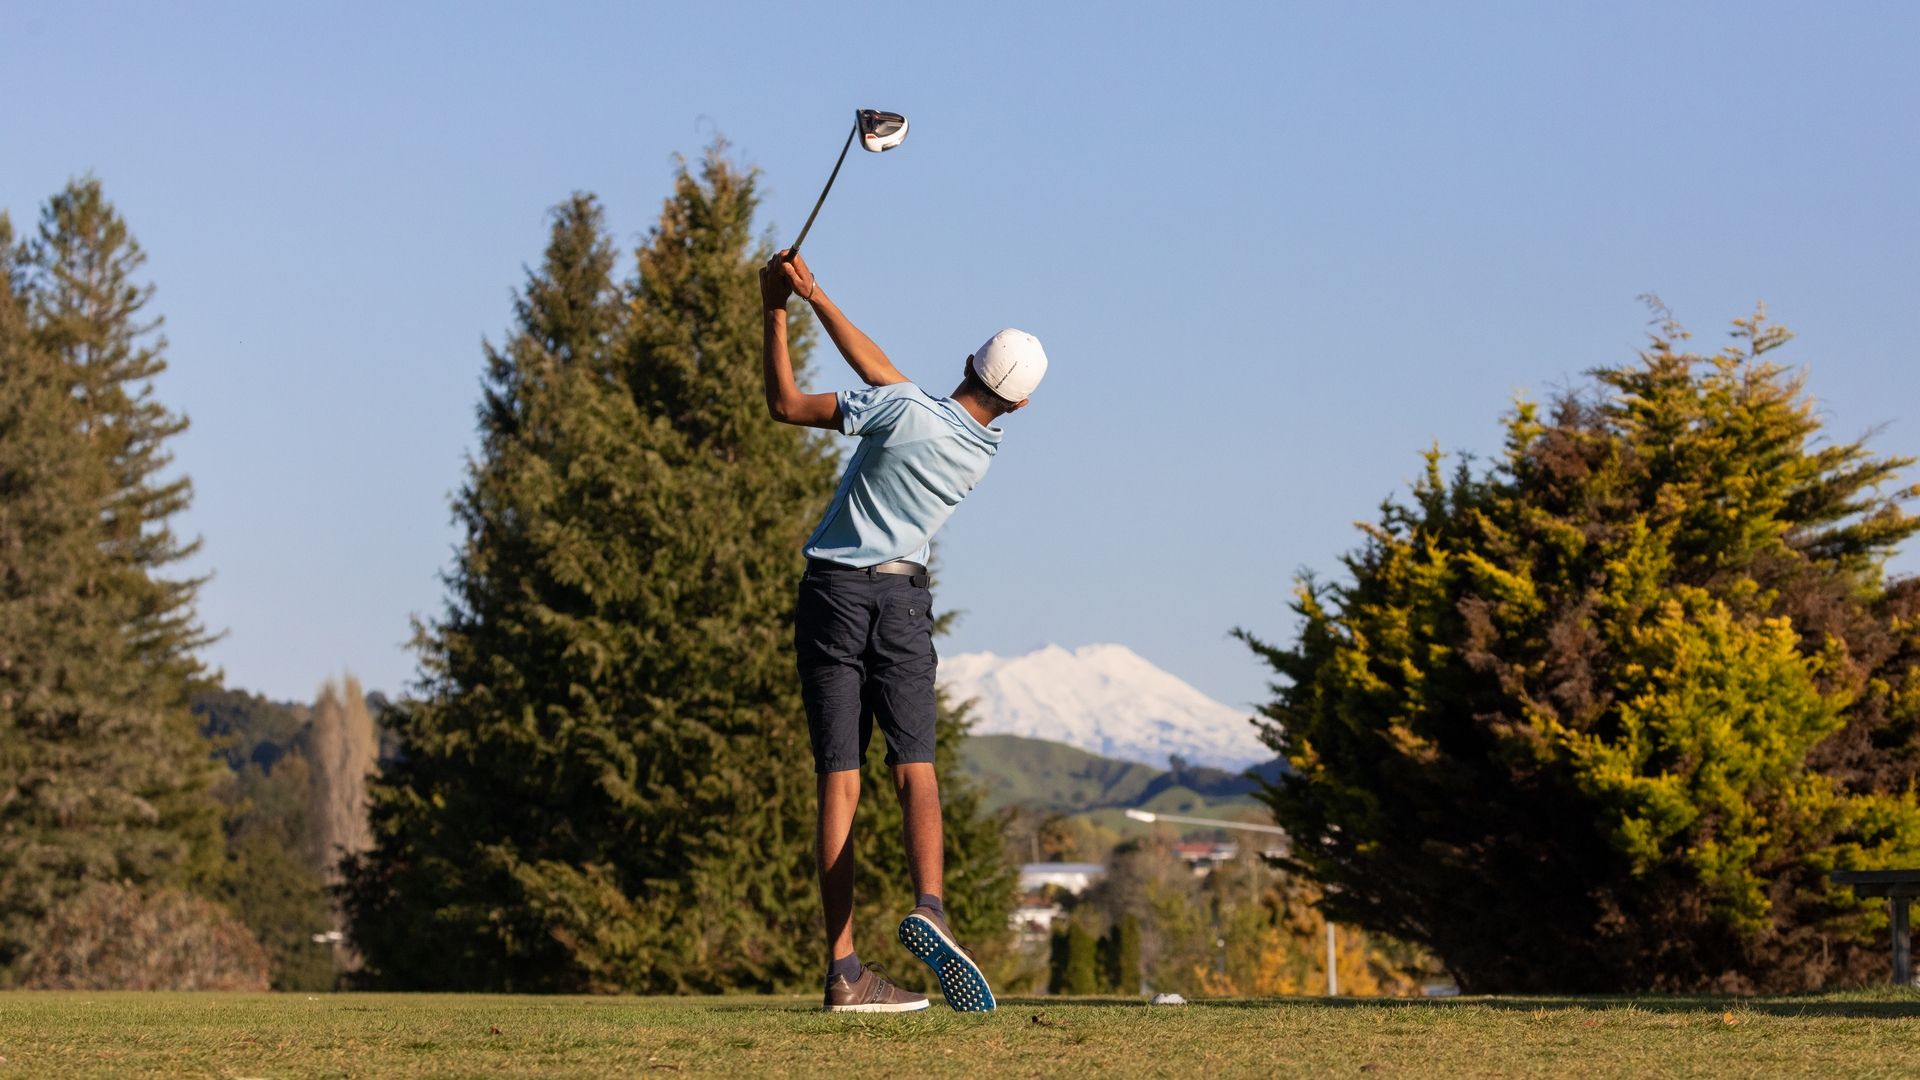 Young golfer teeing off at Taumarunui Golf Club with Mt Ruapehu in the background - Visit Ruapehu.jpg